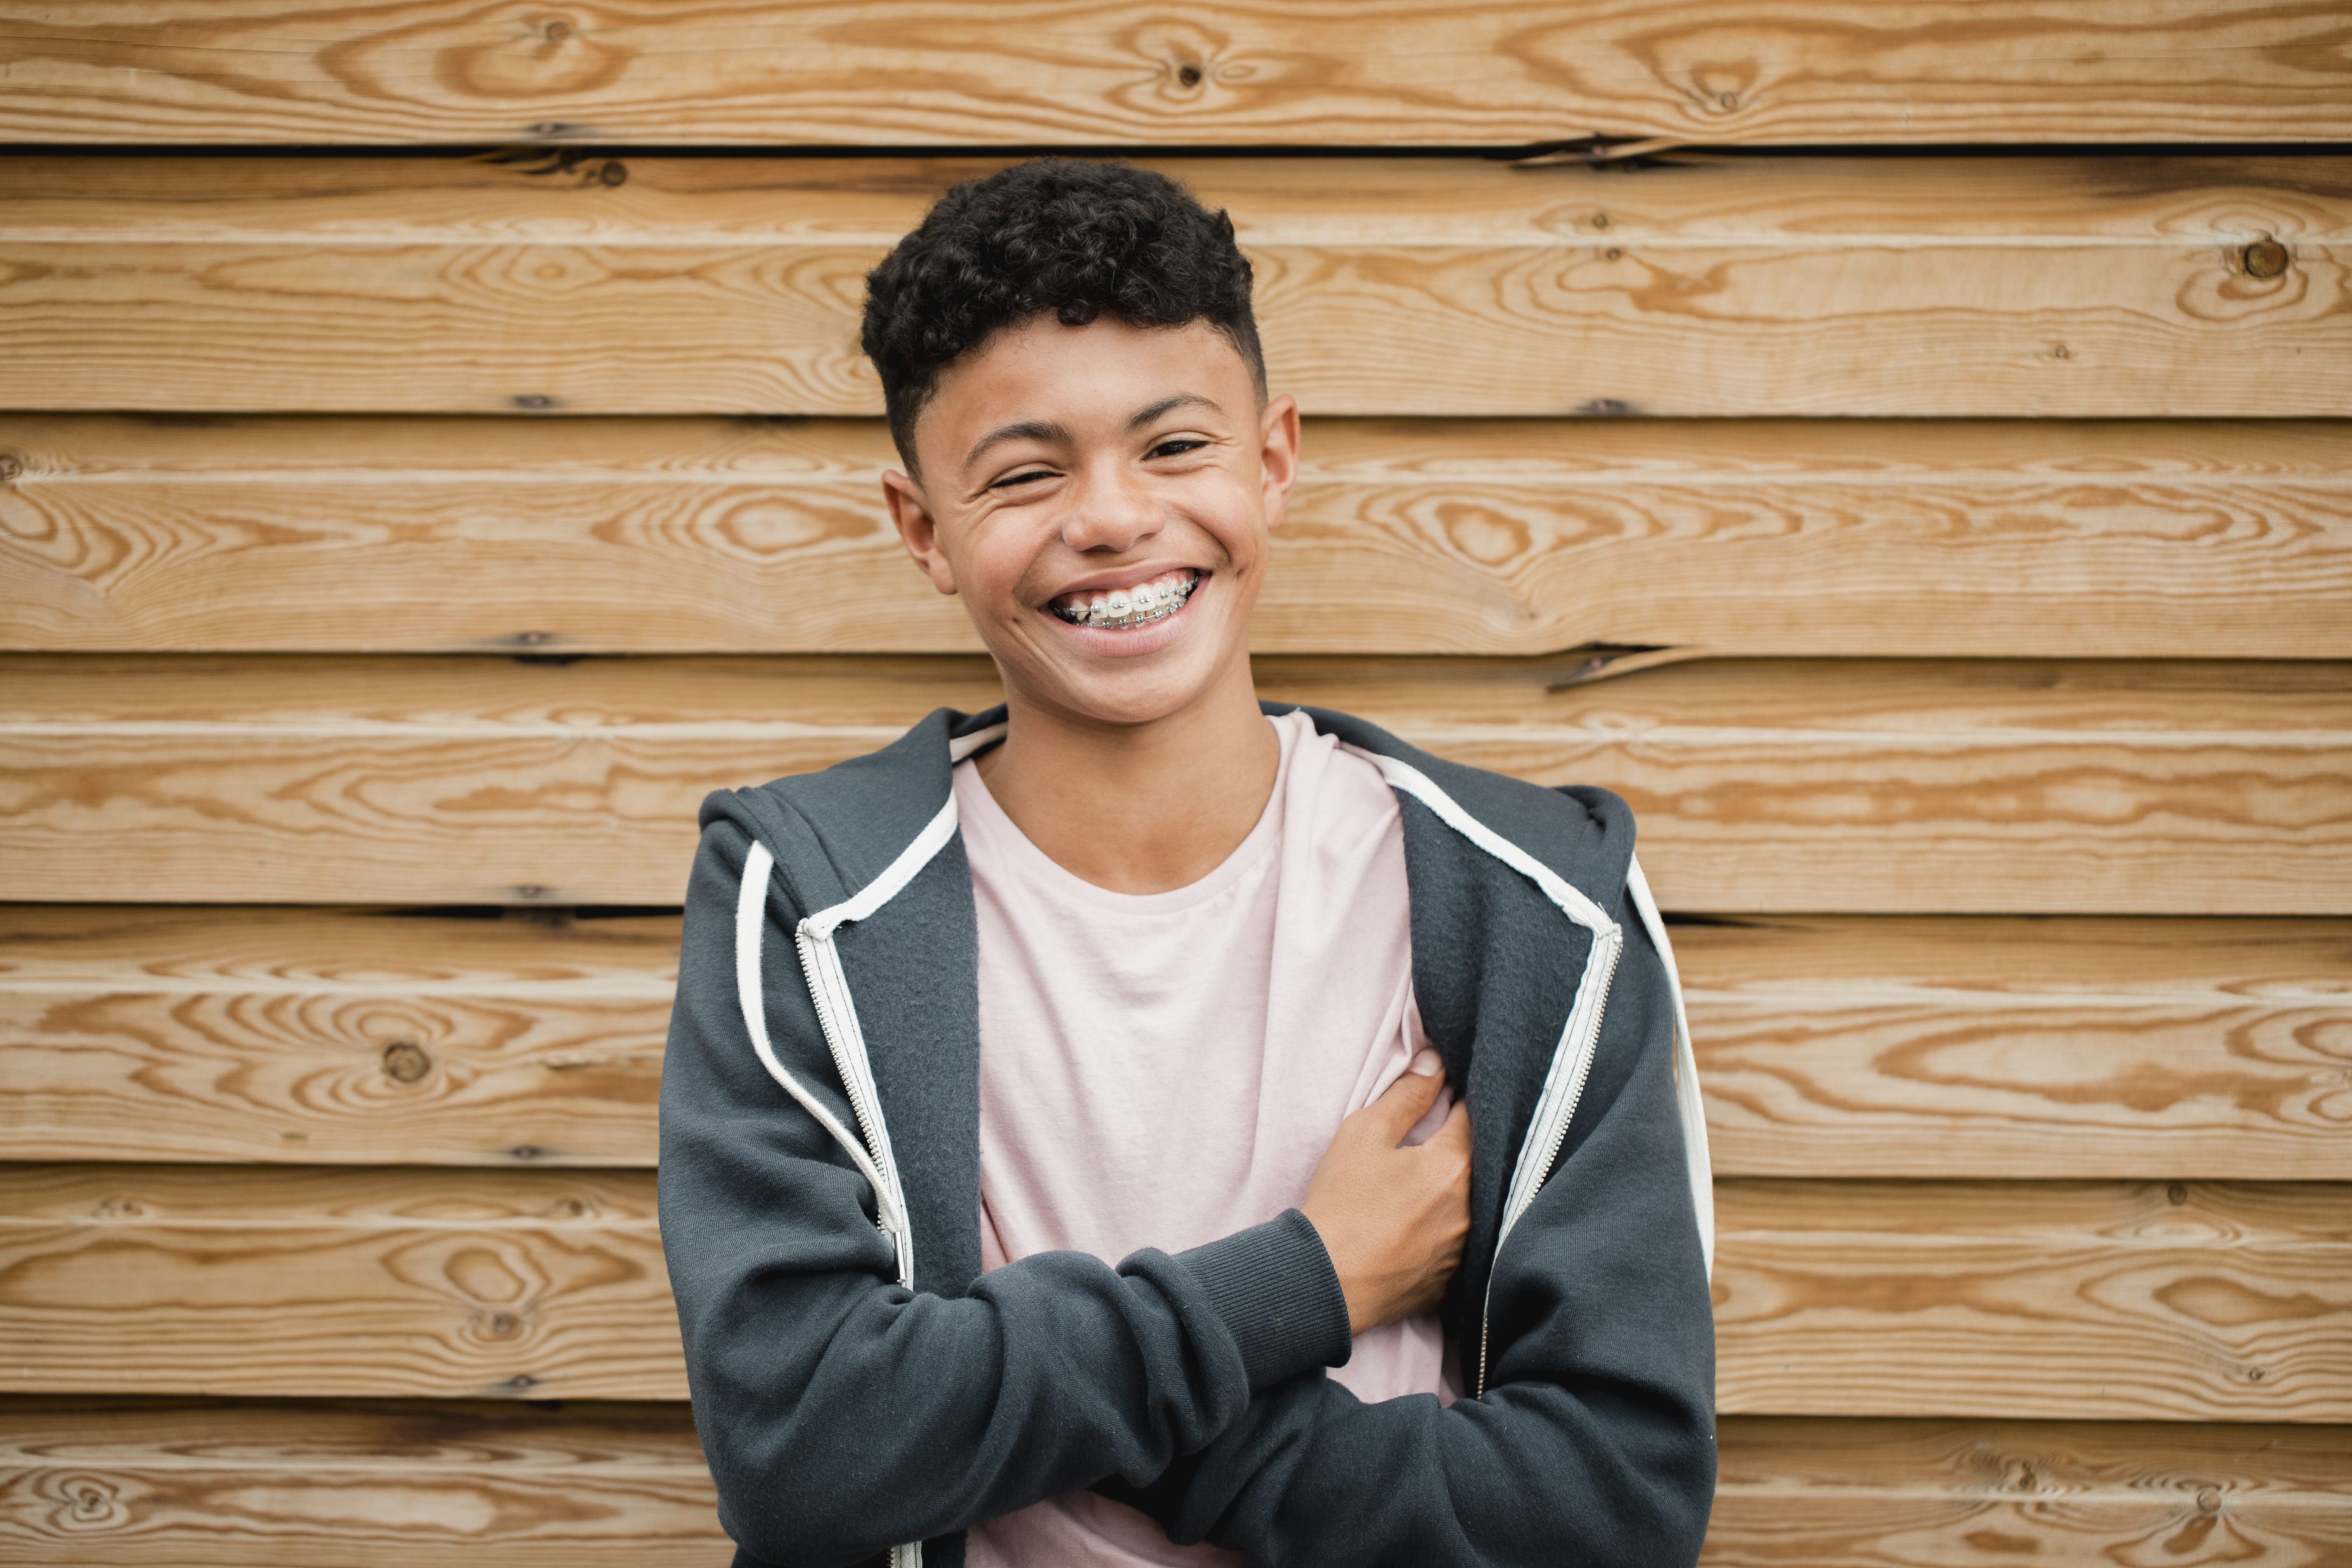 Smiling boy with braces